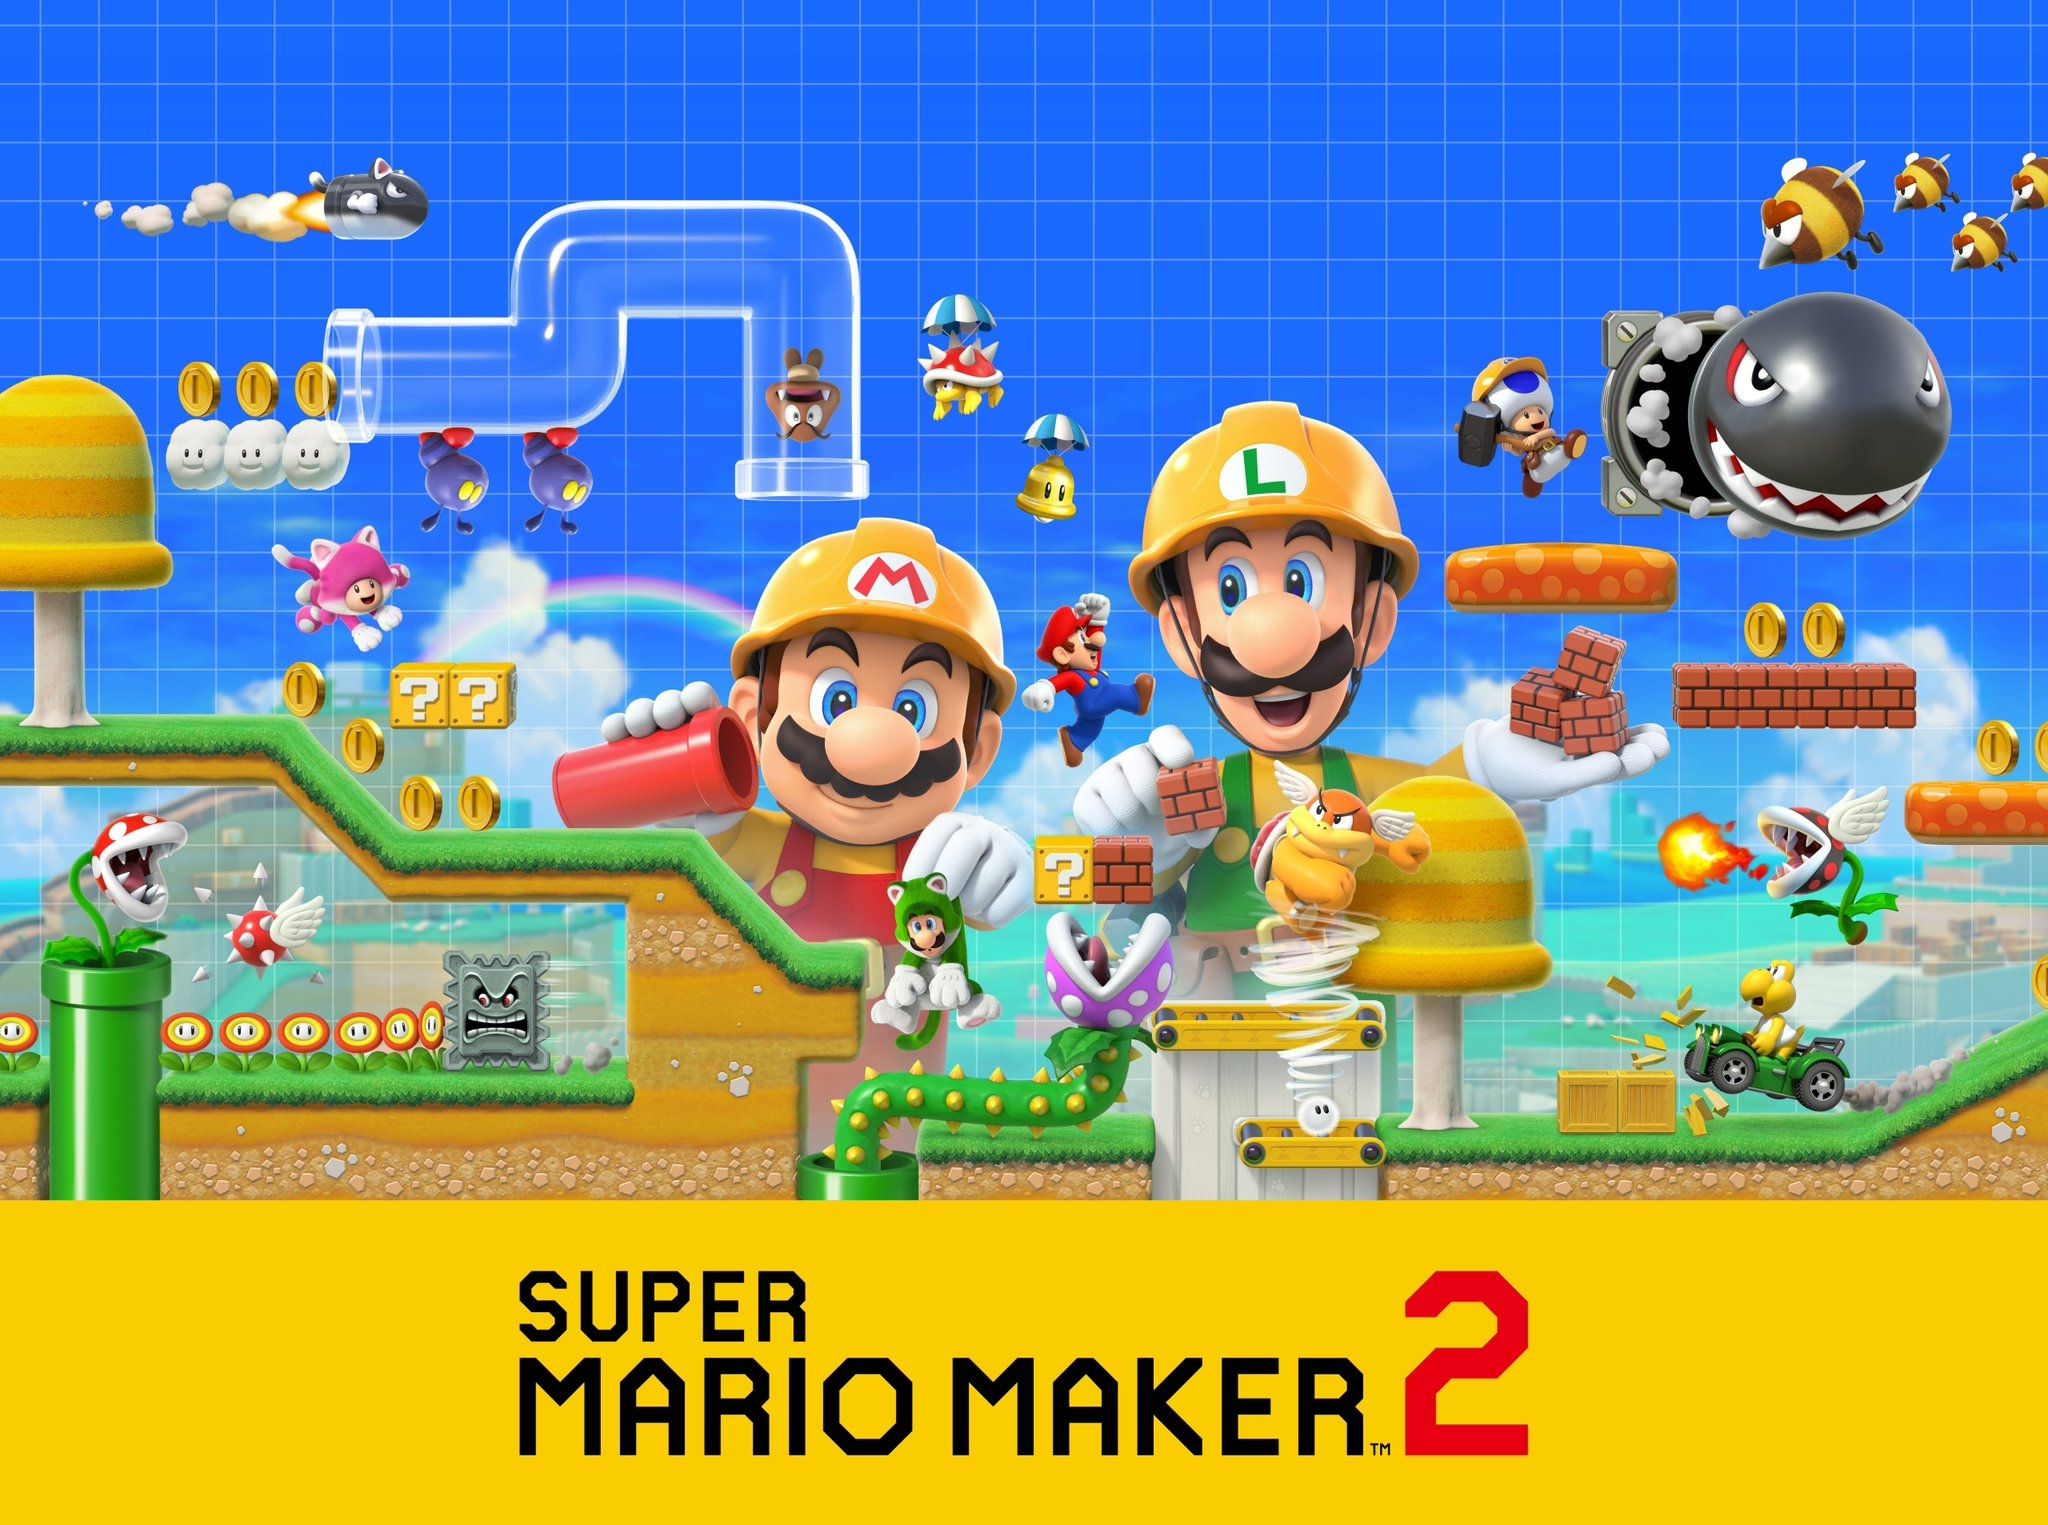 Super Mario Maker 2 gets a date on Switch